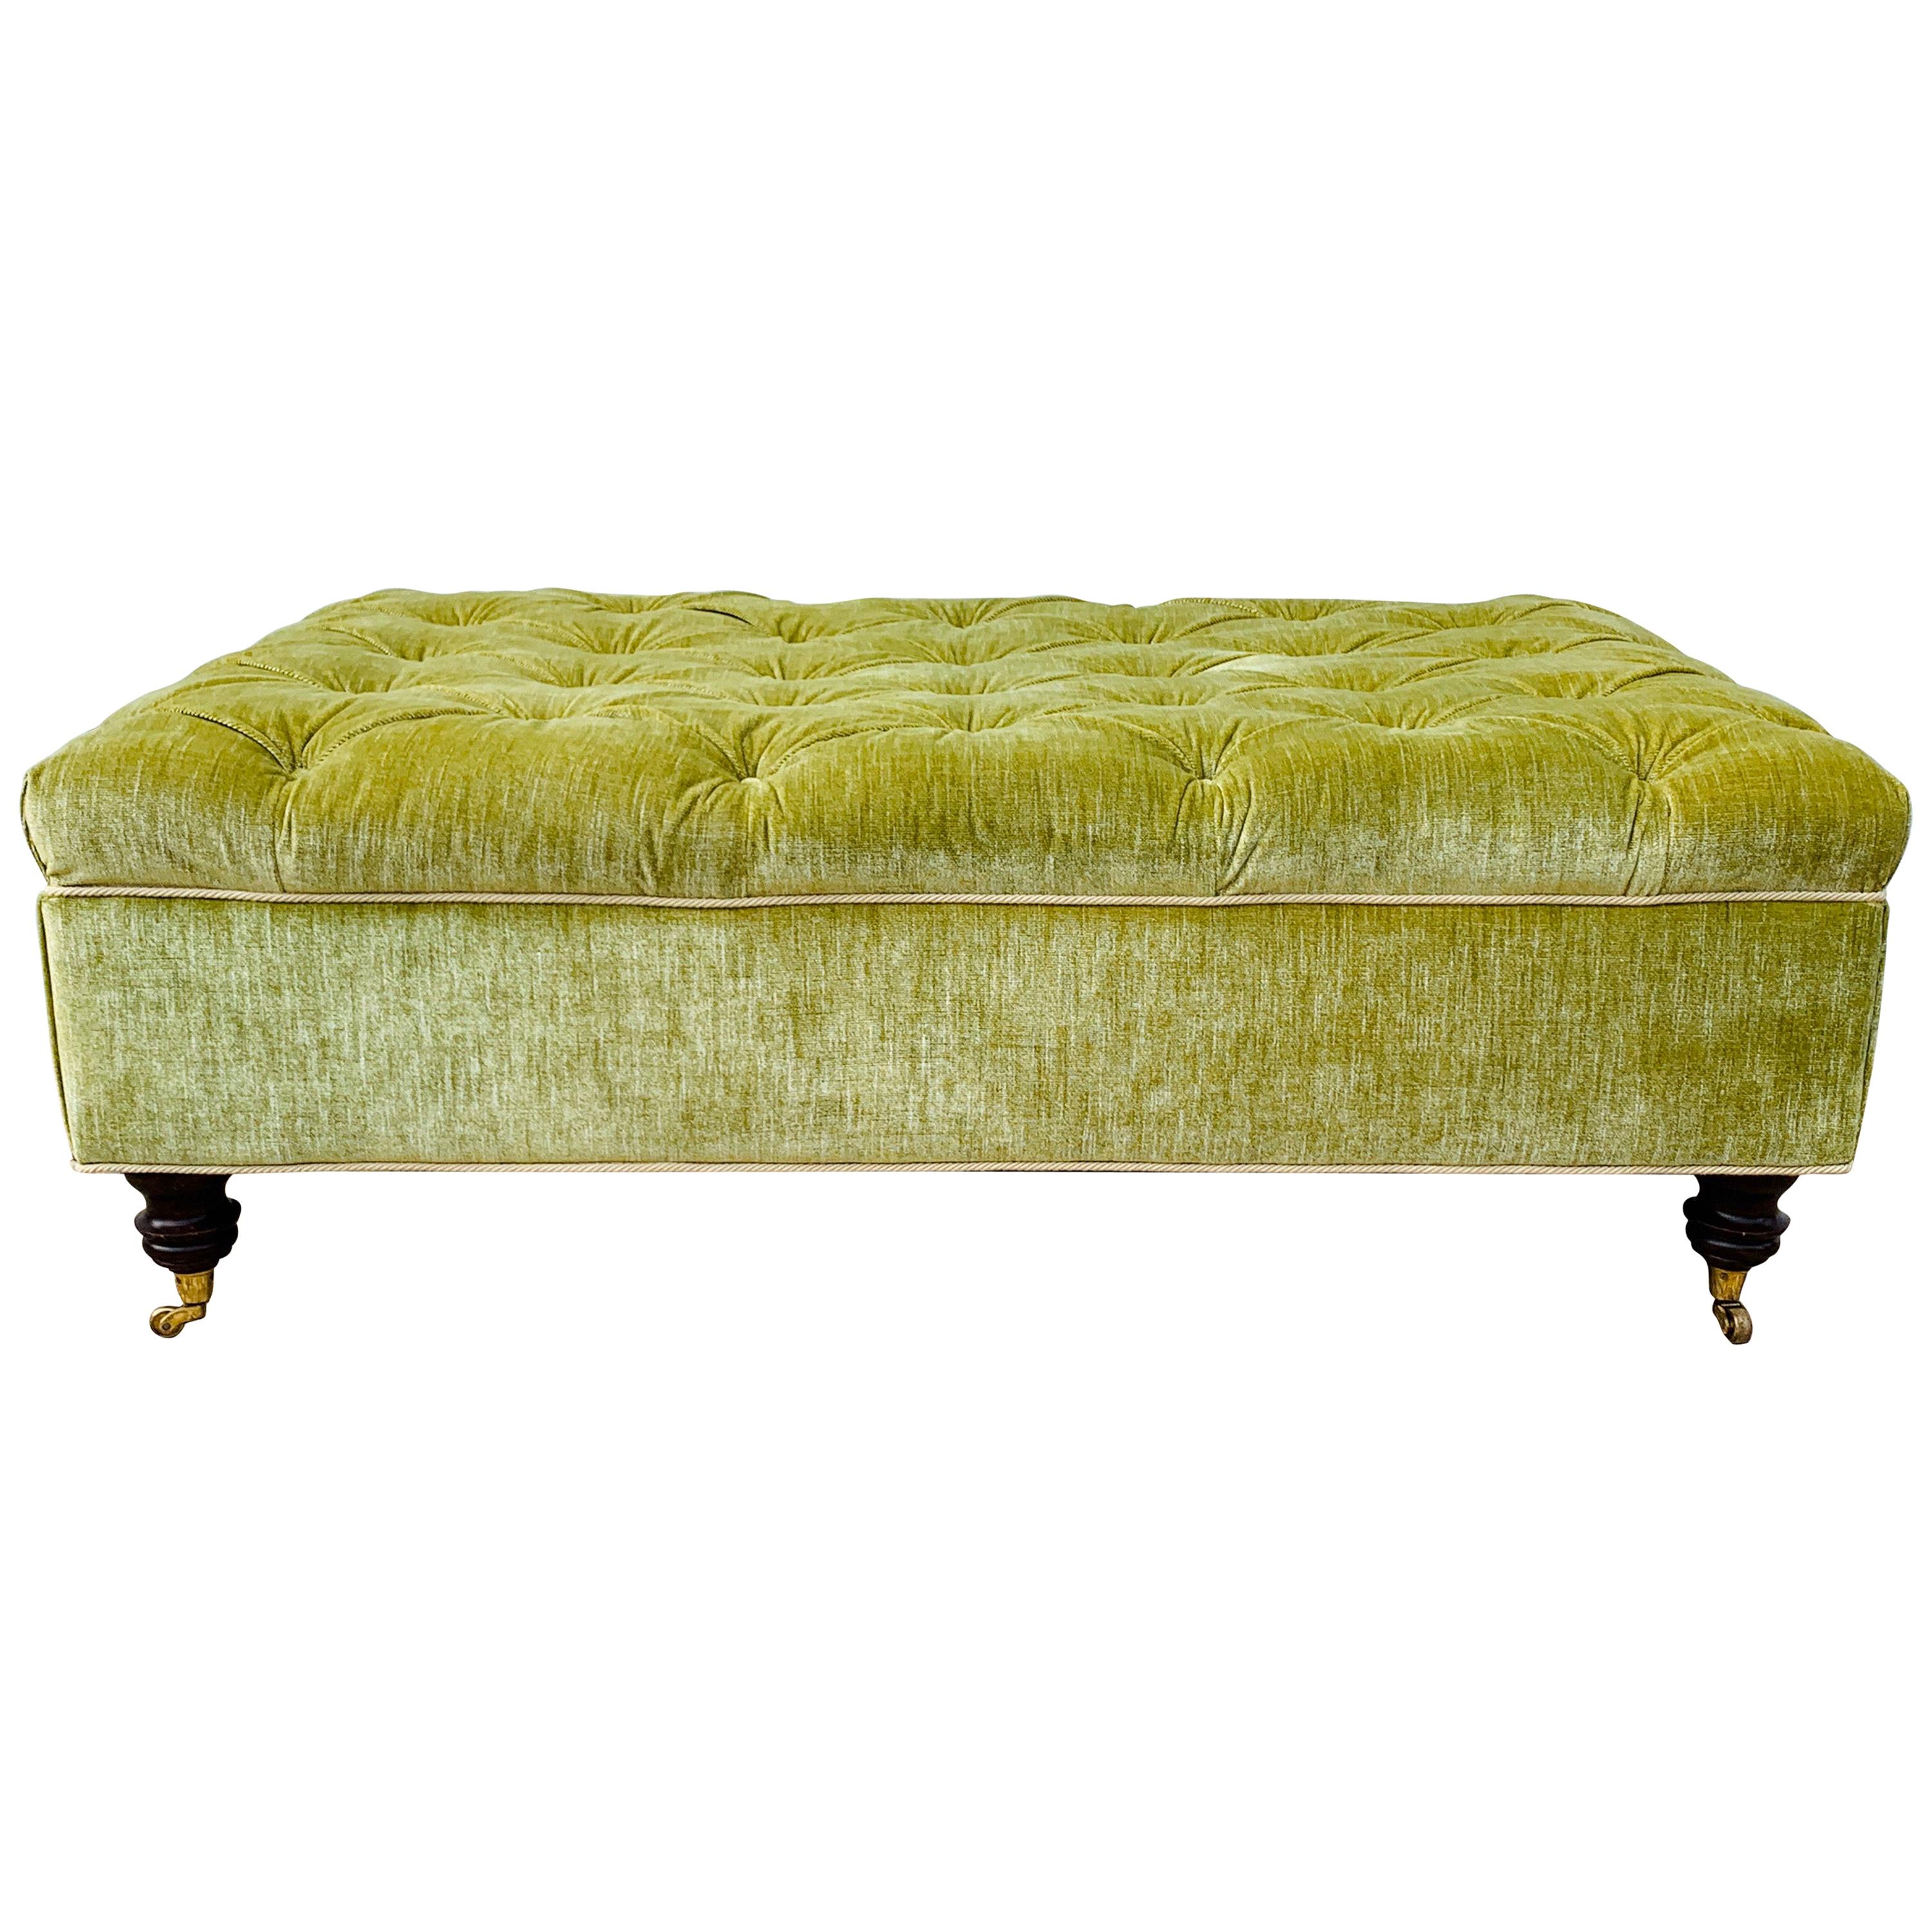 French Ottoman in Green Scalamandré Velvet, circa 19th Century For Sale